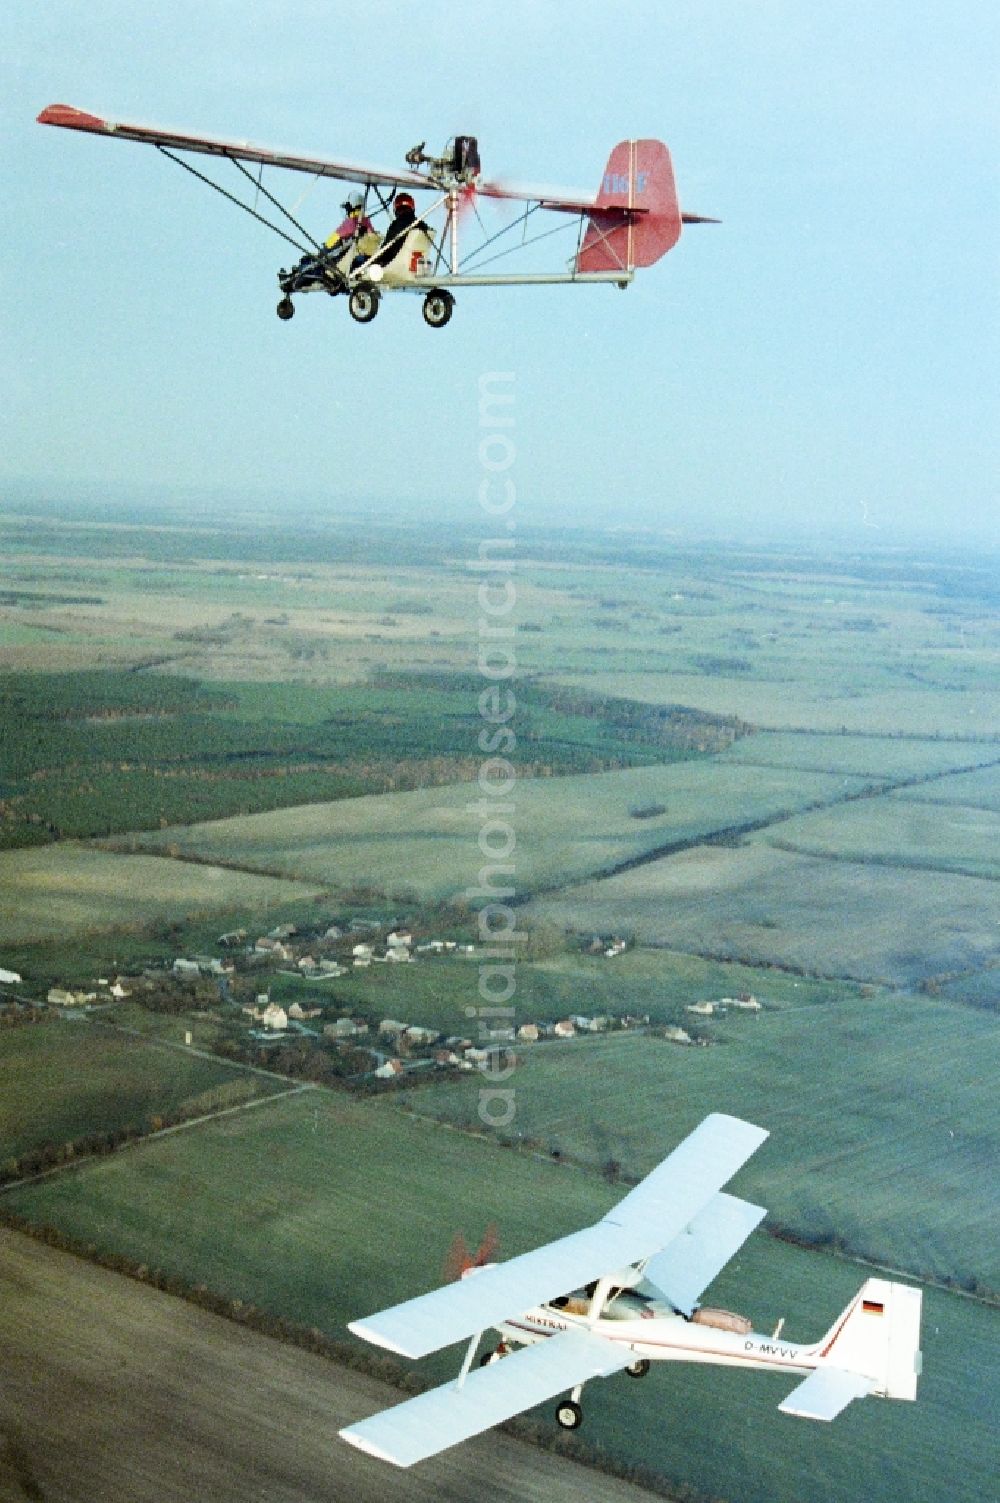 Aerial image Eggersdorf - Ultralight aircraft in flight above the sky MISTRAL with the identifier D-MVVV in formation with a skywalker airplane in Eggersdorf in the state Brandenburg, Germany